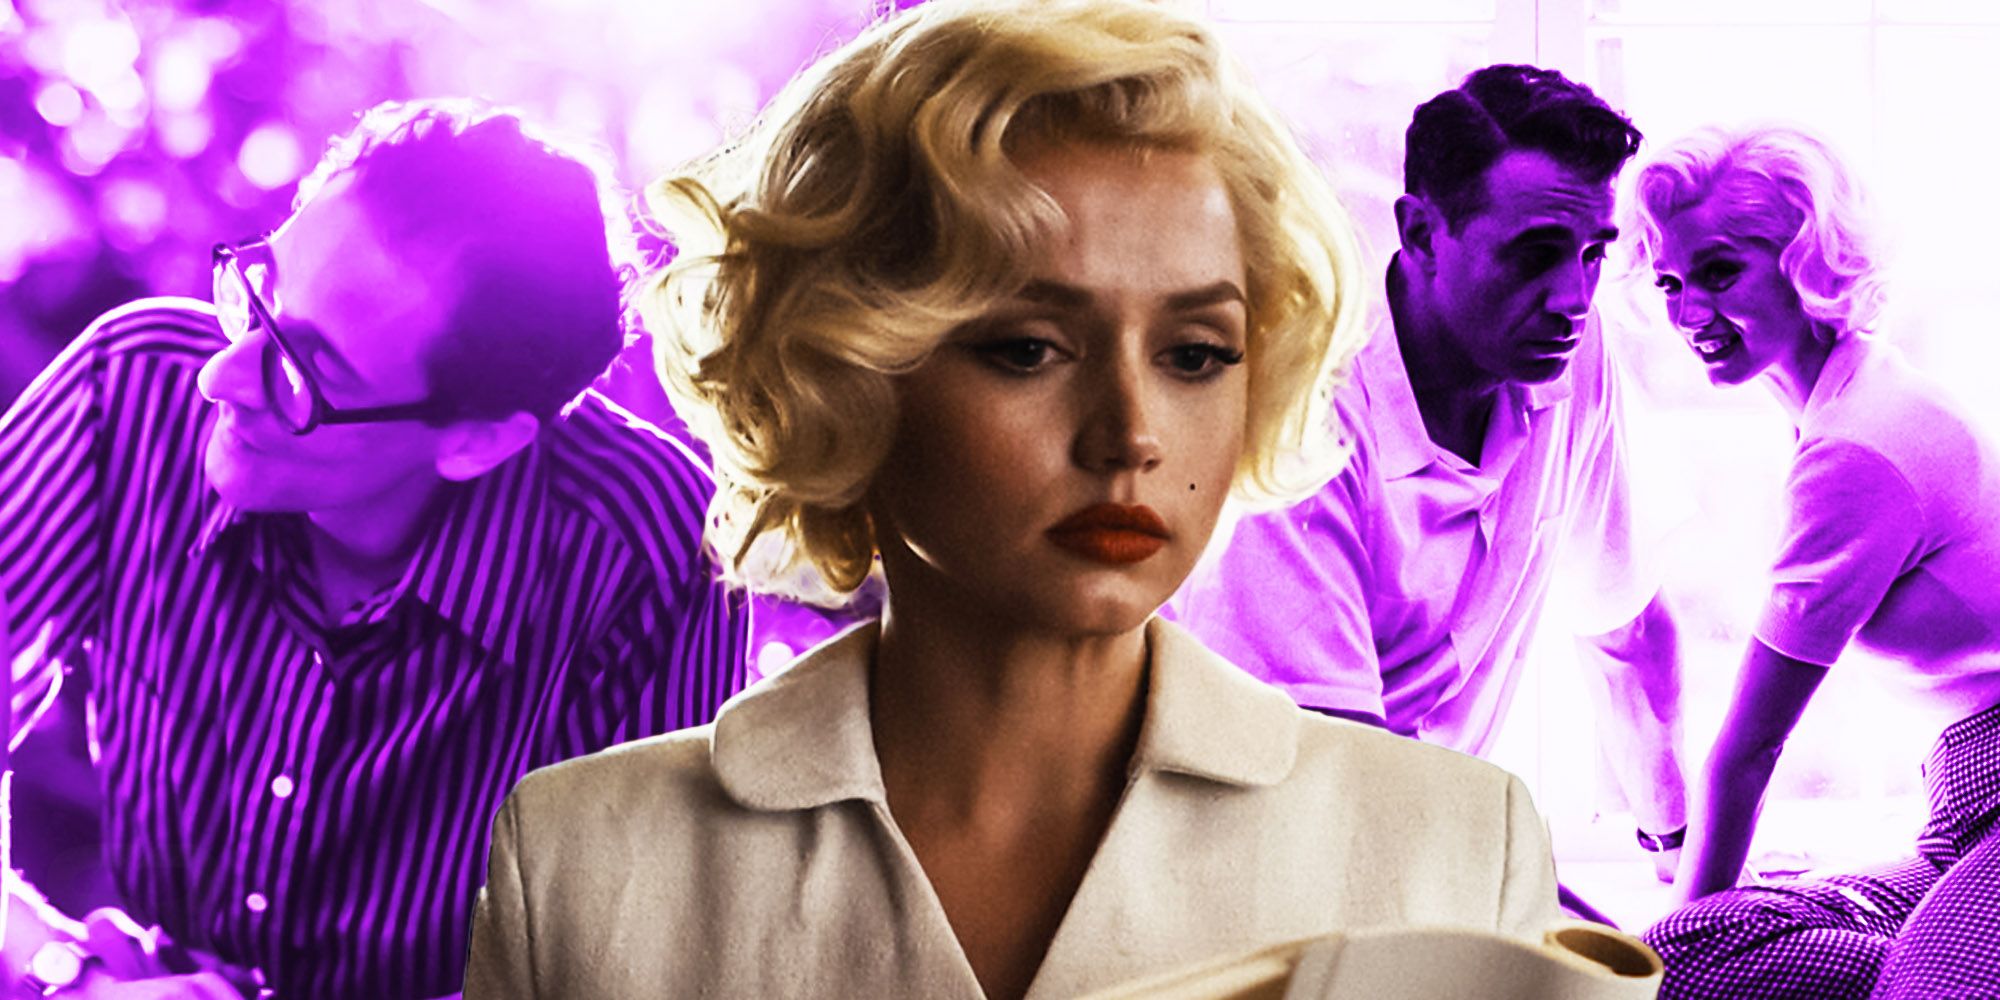 A blended image features Ana de Armas in full color overlaid Adrian Brody, Bobby Canavale, and Ana de Armas in purple, all as their characters in Blonde.